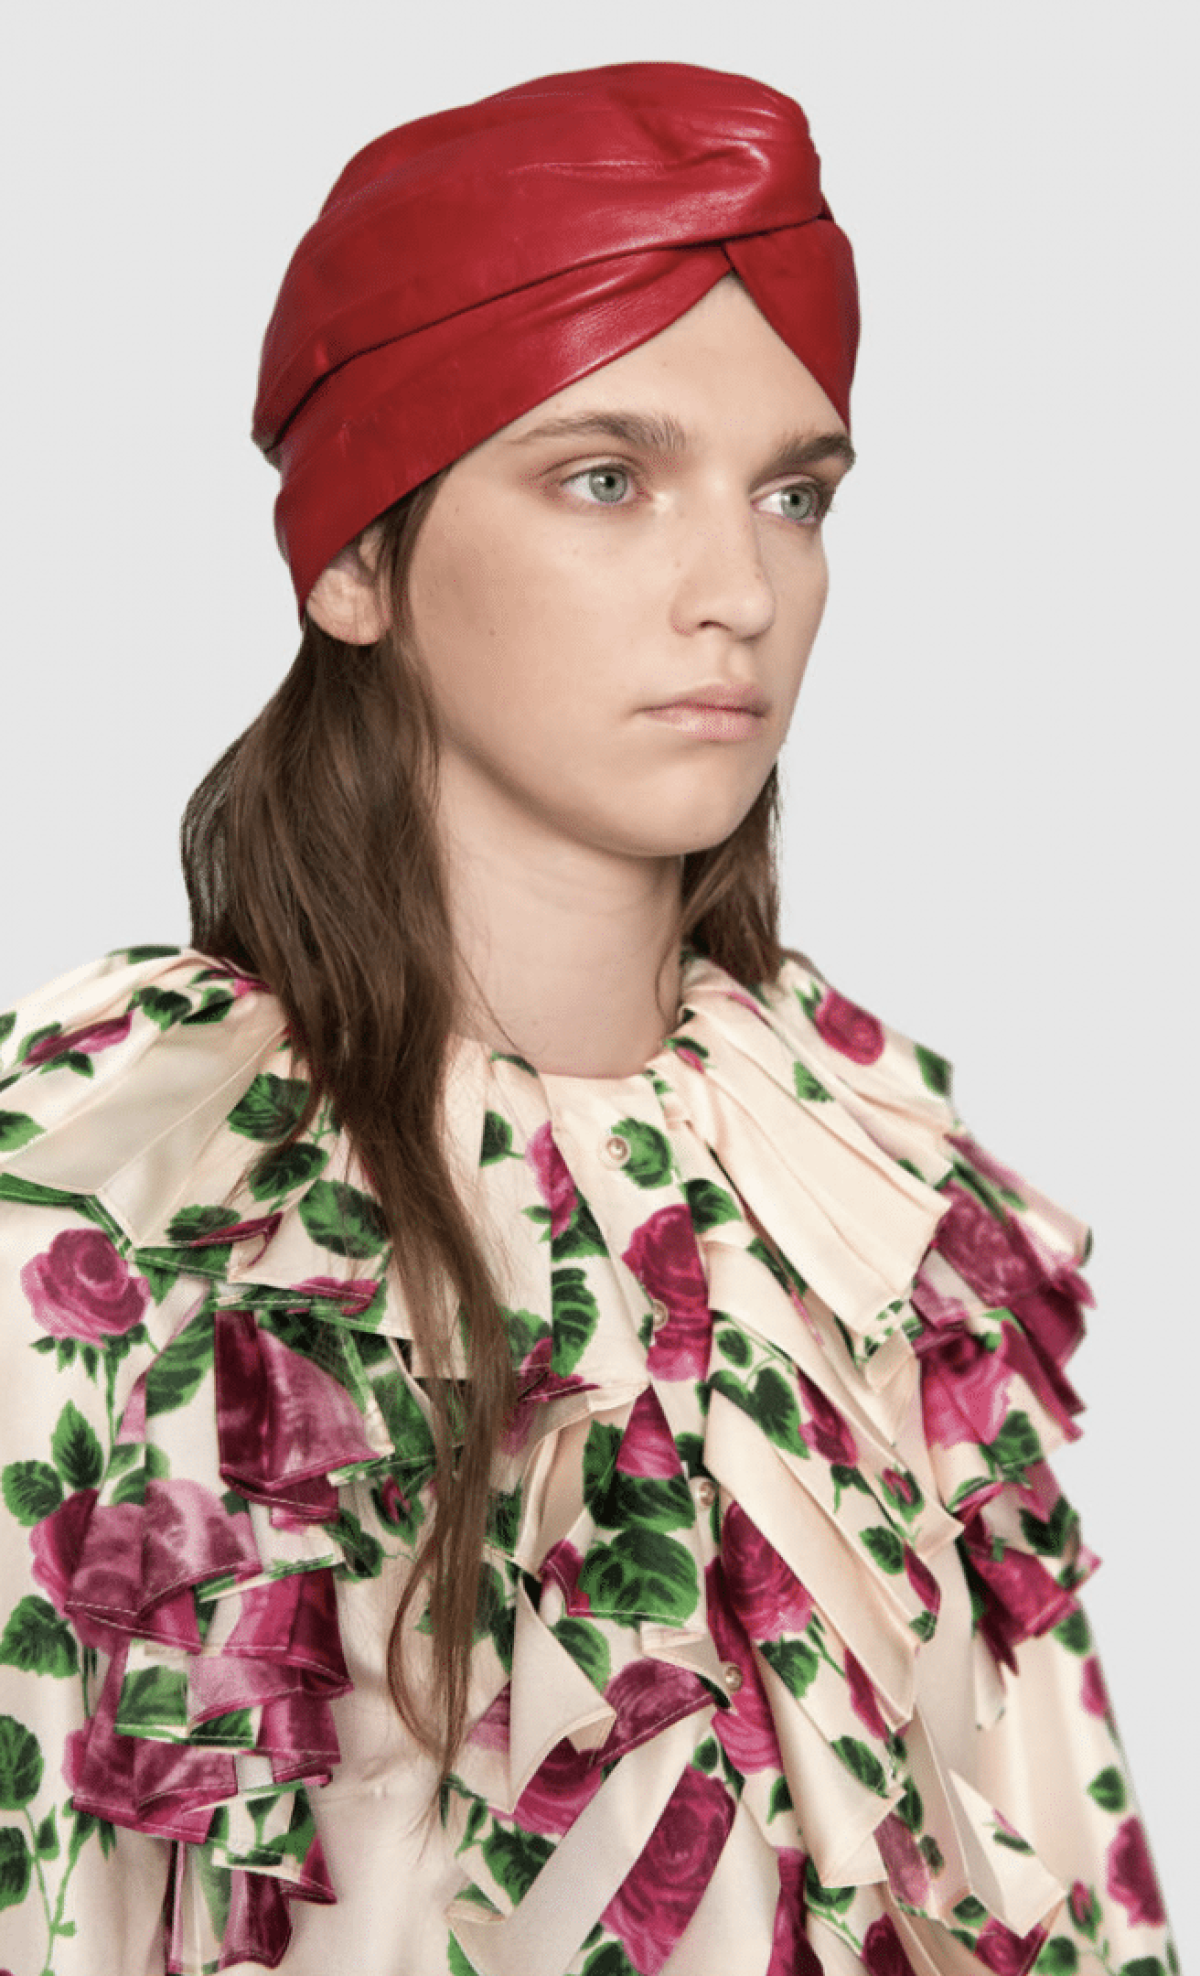 Gucci’s turban ‘accessory’ is disgraceful